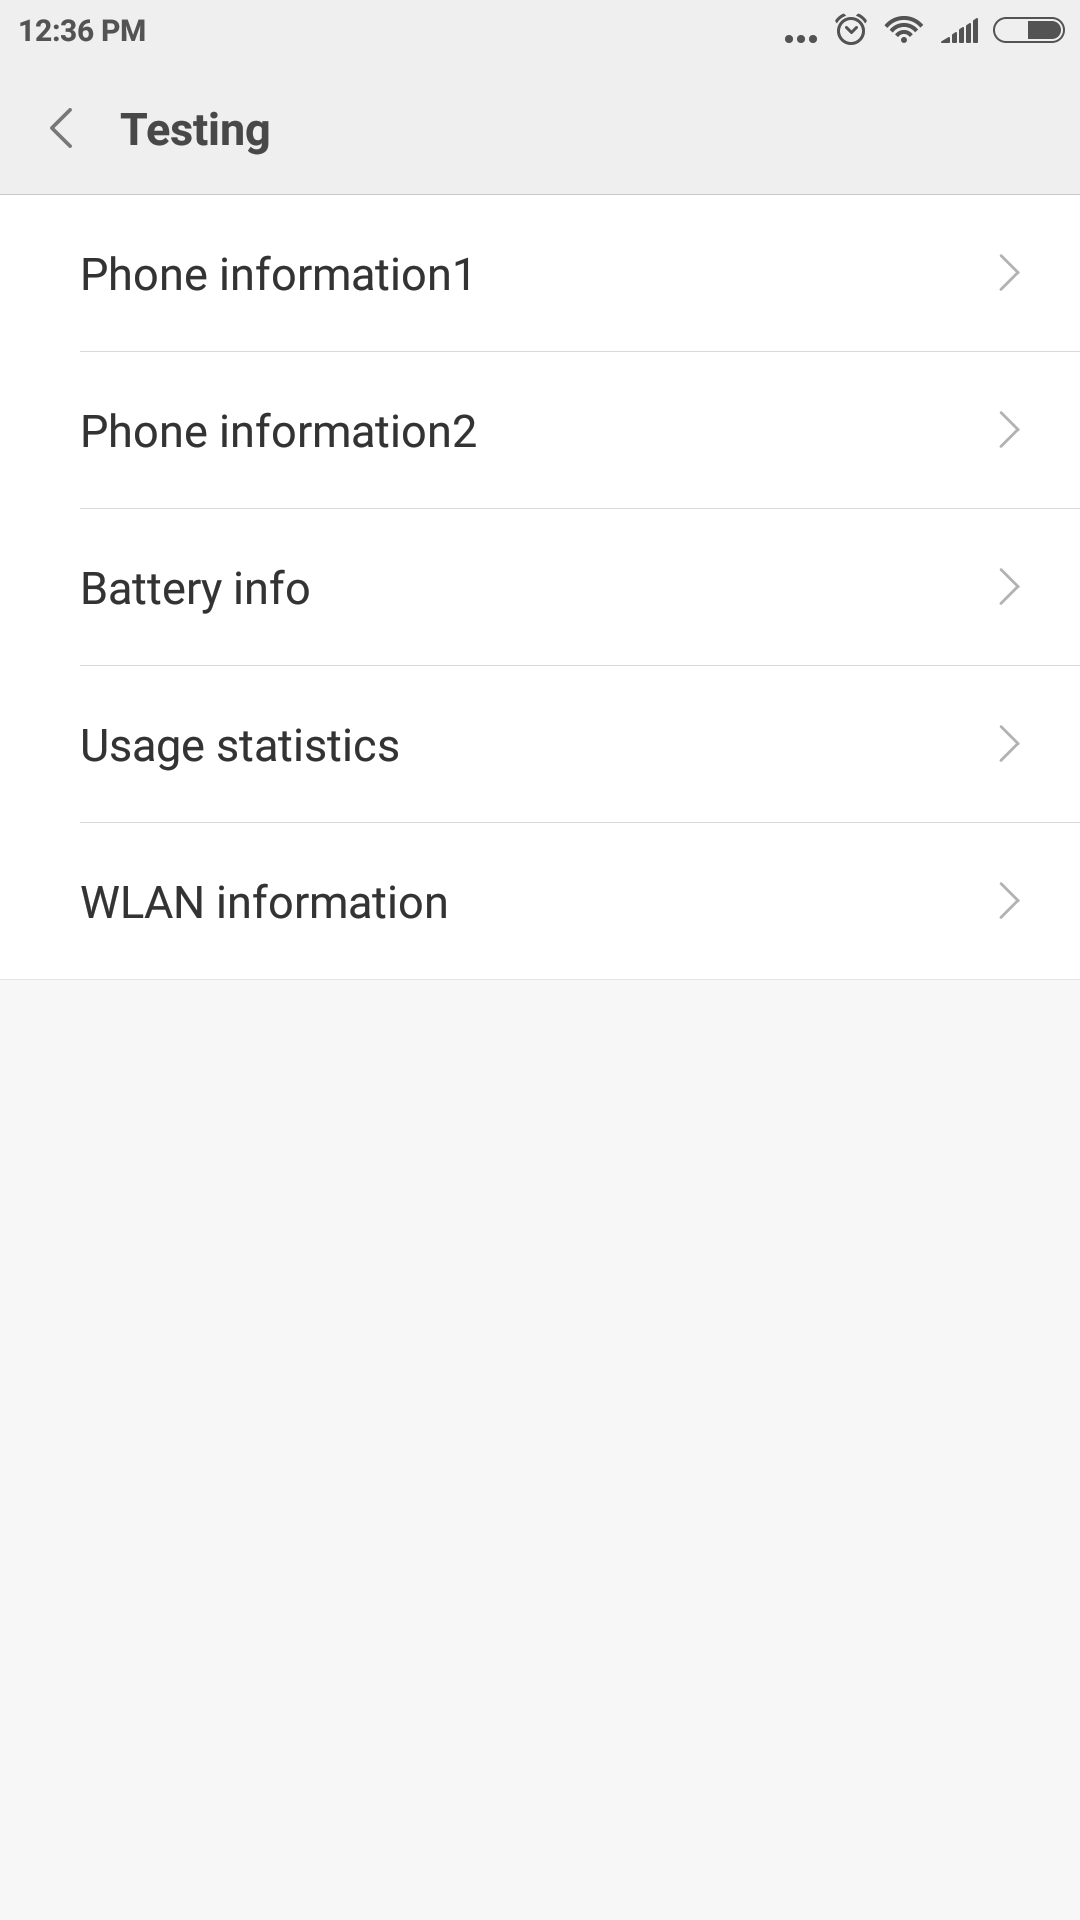 Android settings for *#*#4636#*#*